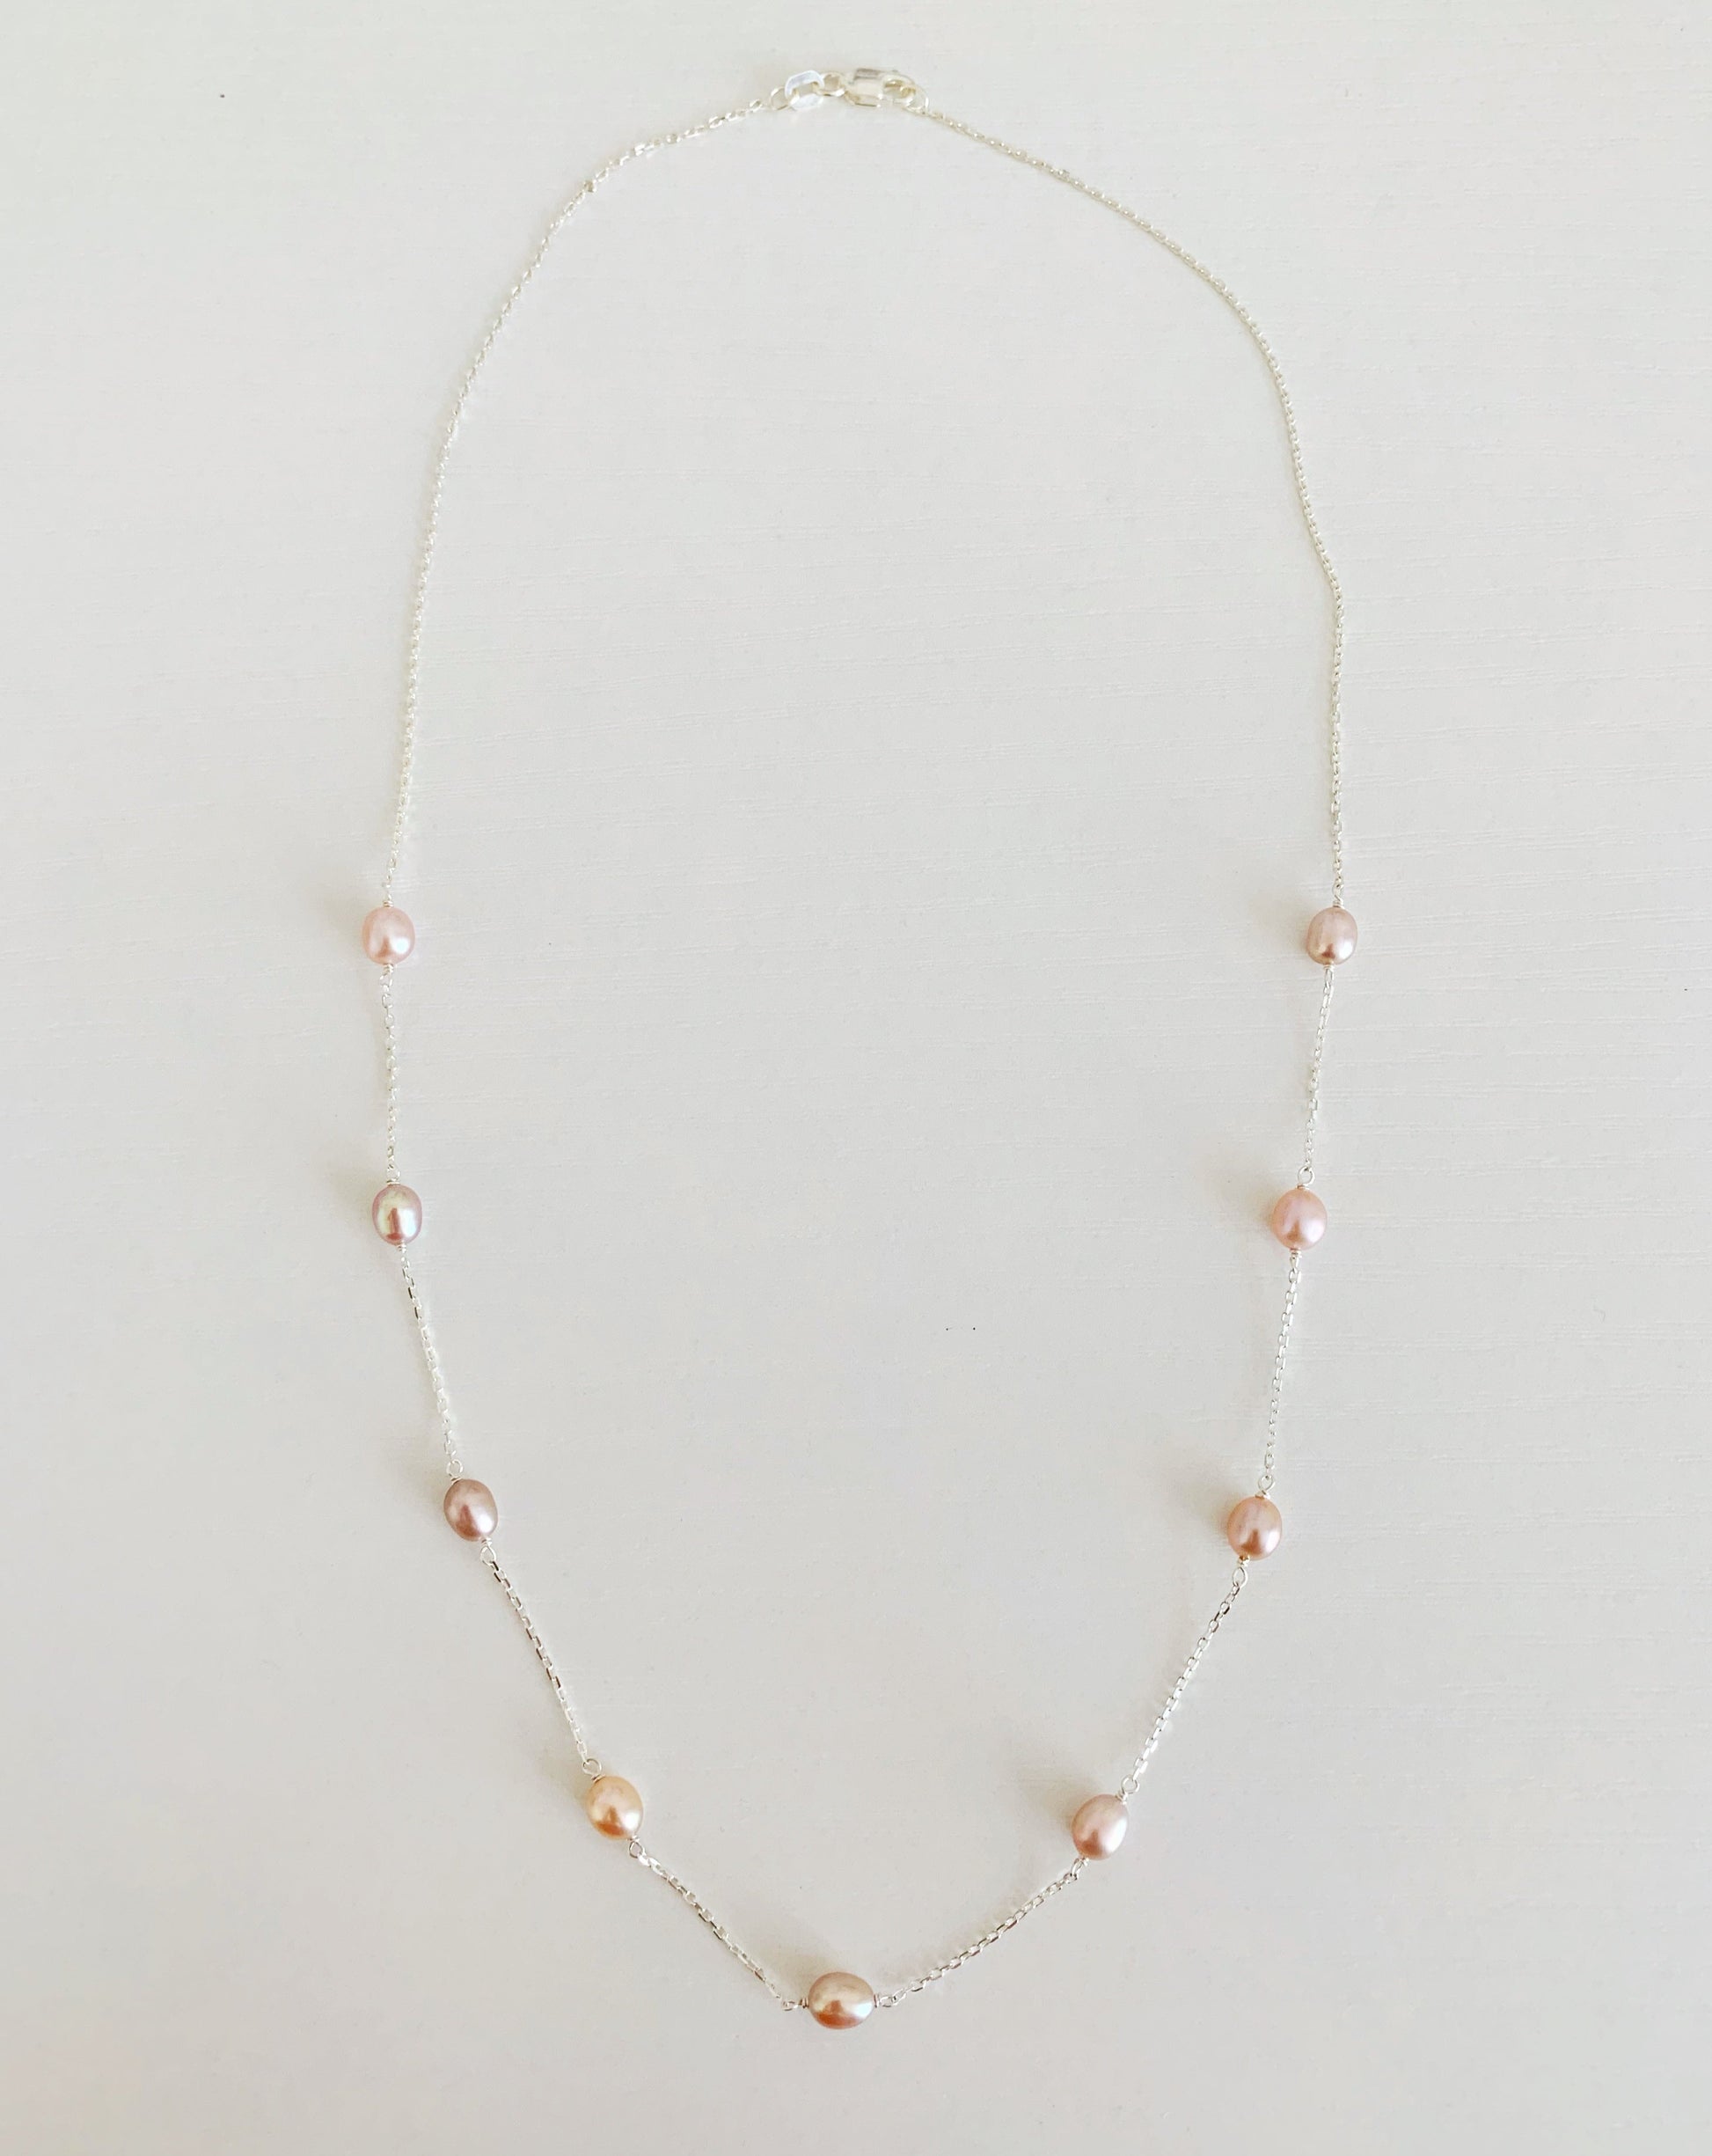 Block Island Necklace by mermaids and madeleines features natural color pink freshwater small oval pearls in stations on a sterling silver chain. there are 9 pearls spaced on the front half of the necklace. this is a photograph of the entire necklace on a white surface